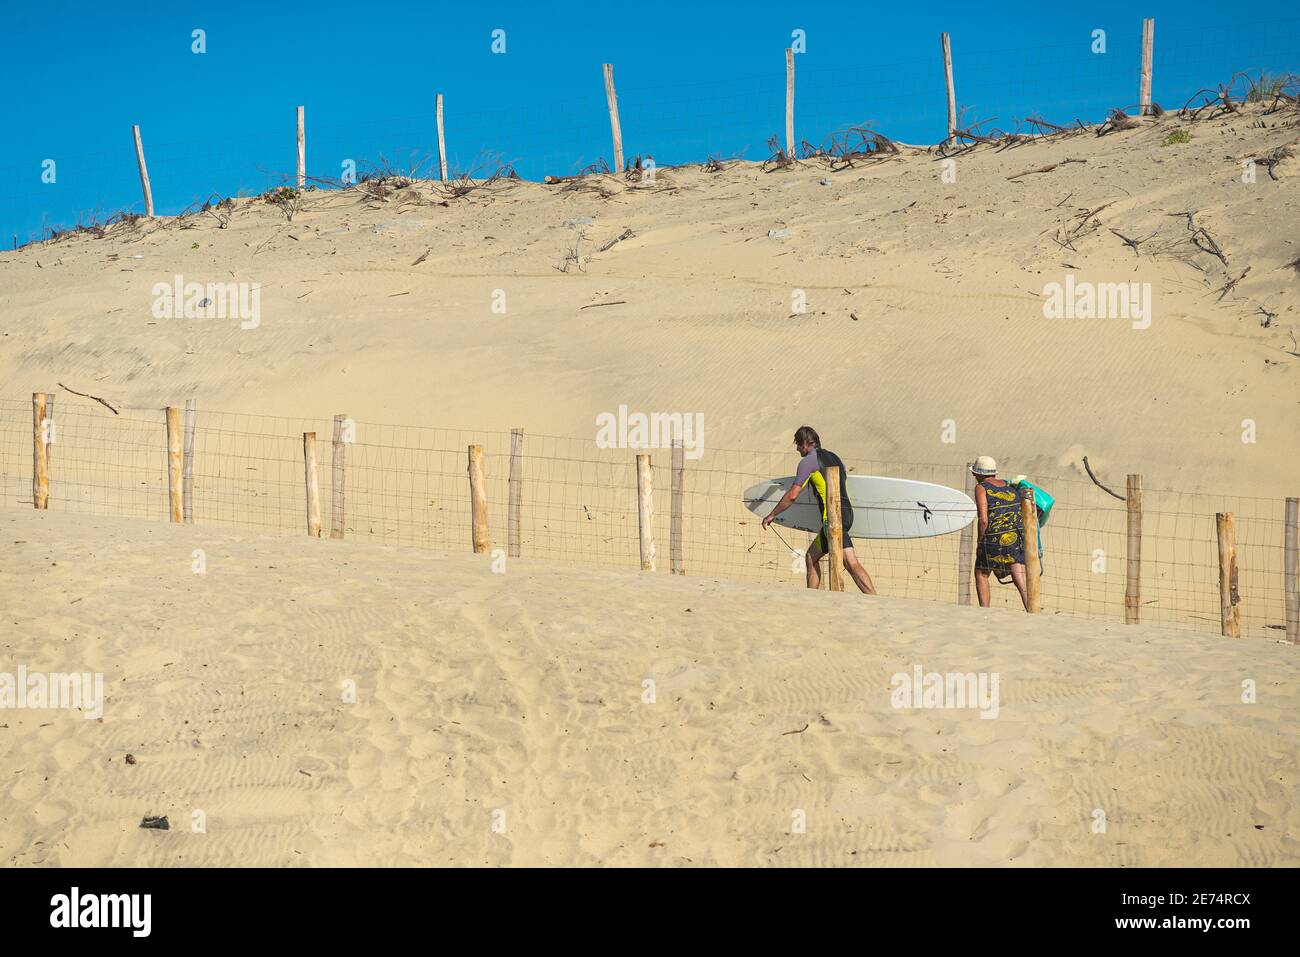 Man with surfboard leaving the beach with his family in Biscarrosse.Biscarrosse Plage is an important surf destination on the Atlantic Ocean in France Stock Photo